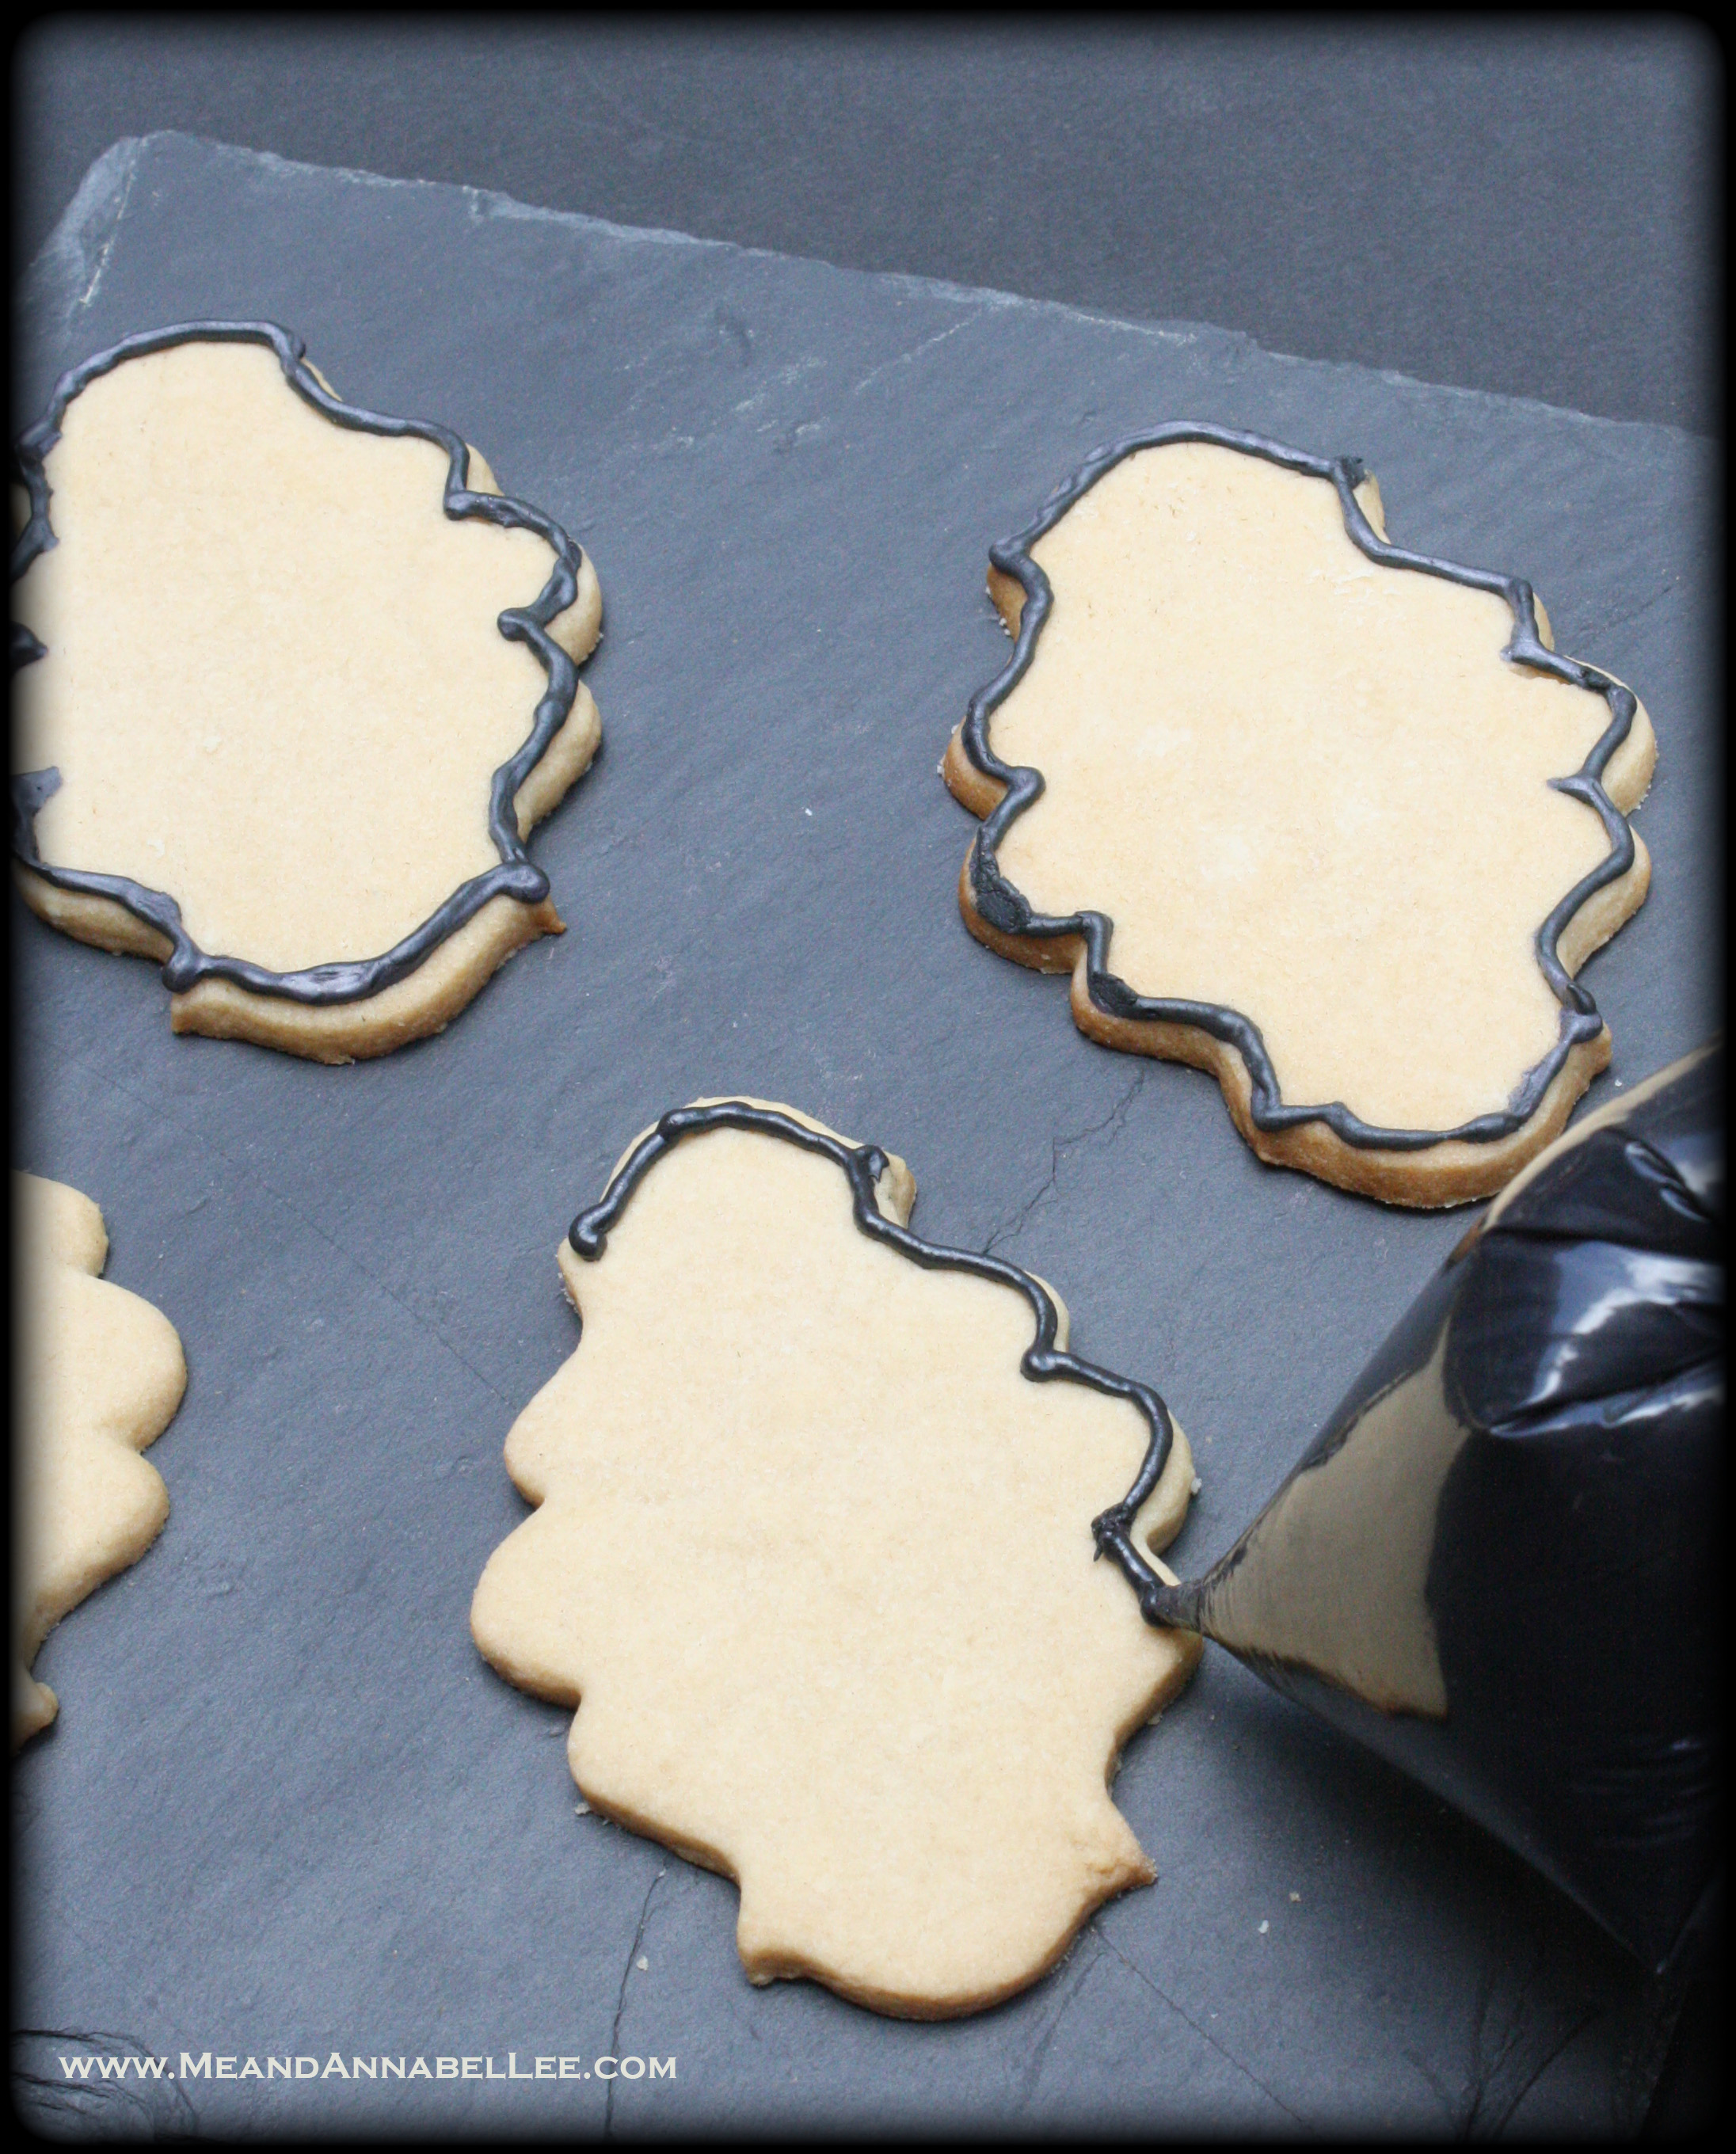 How to Decorate Victorian Frame Cookies | Black Royal Line Icing | Almond Vanilla Sugar Cookies | www.MeandAnnabelLee.com